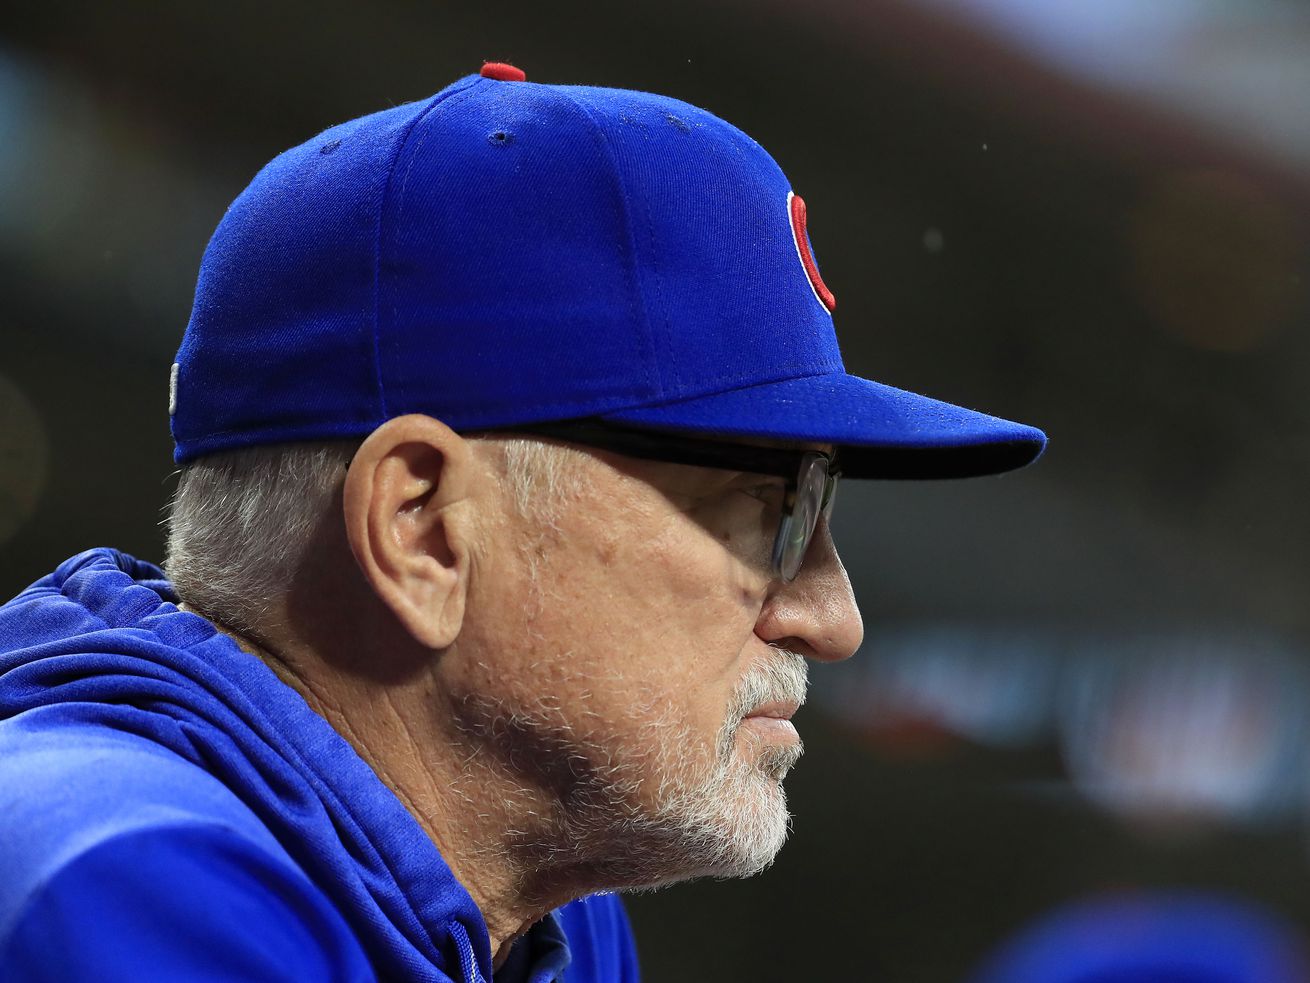 Manager Joe Maddon and the Cubs got another glimpse this week at how tough the NL Central will be this season, losing two out of three to the Reds in Cincinnati.